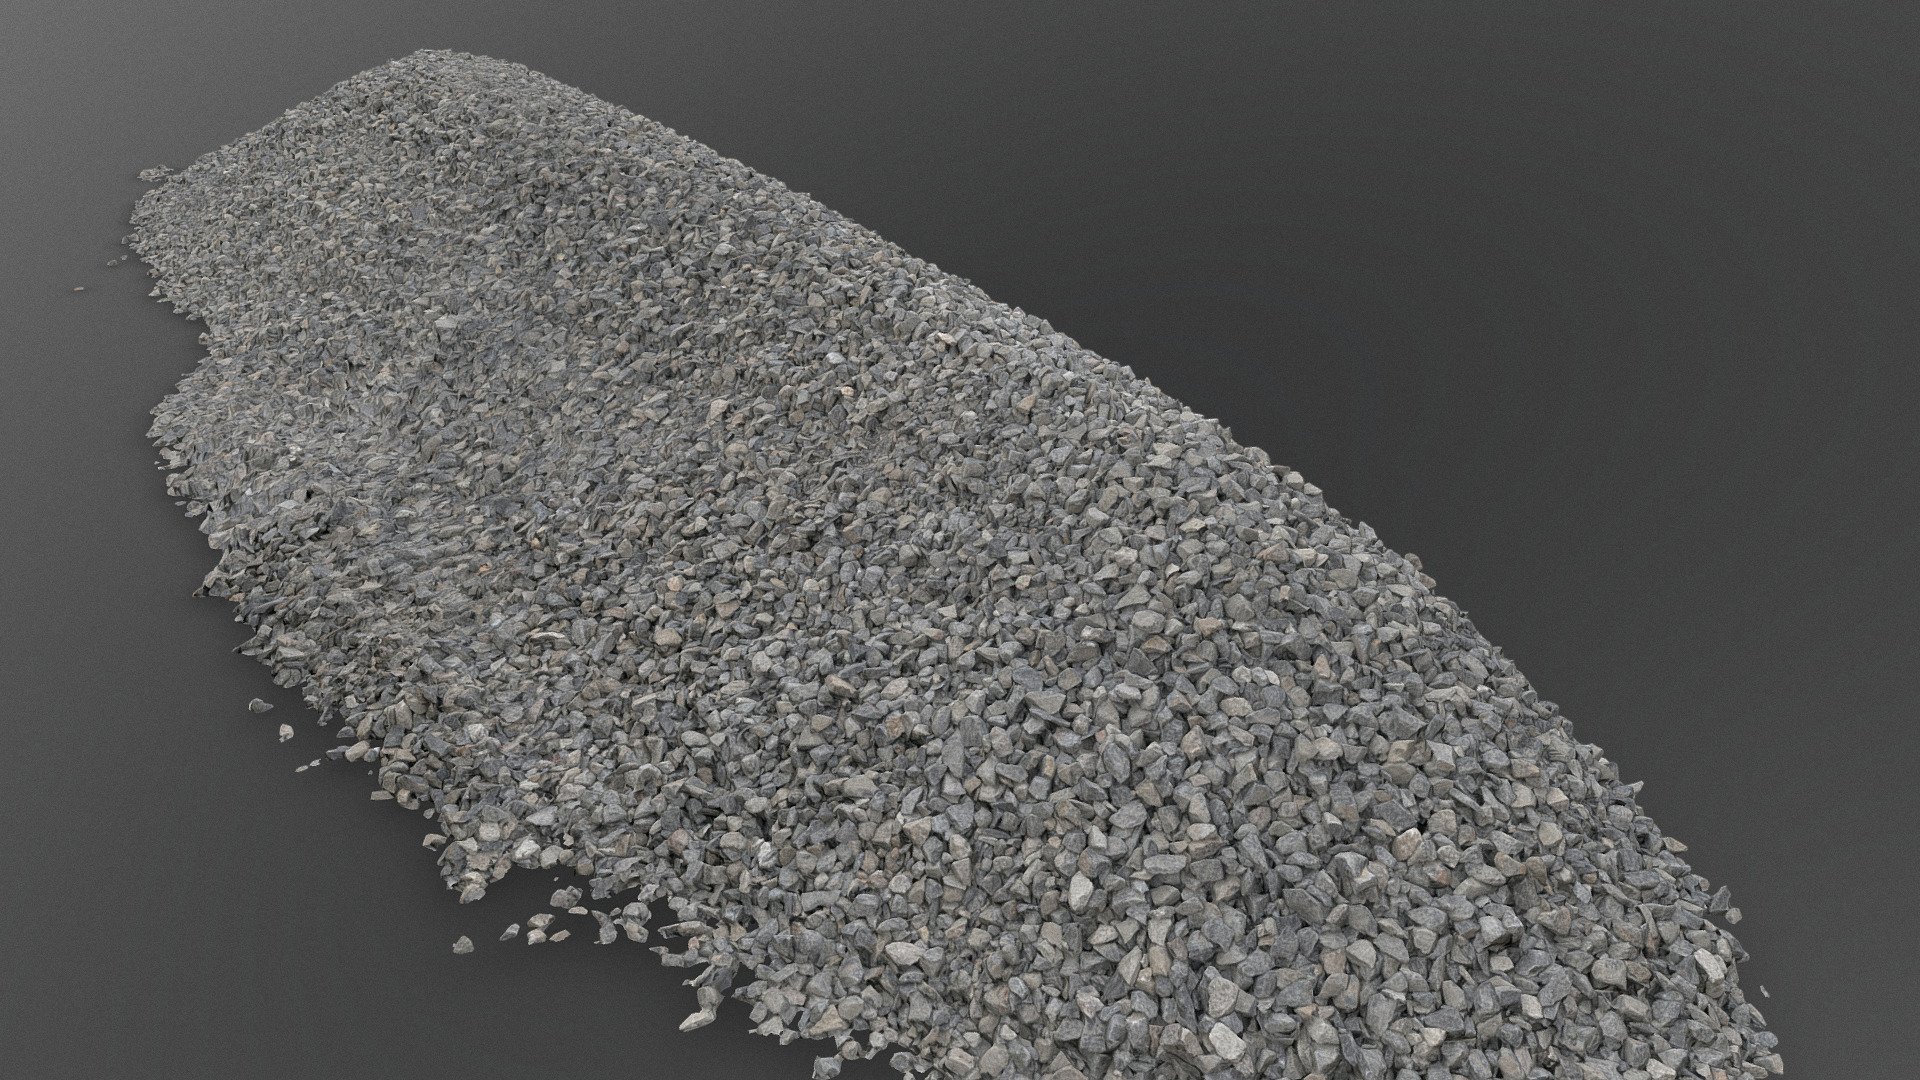 Long Gray Paving gravel heap pile mound of building pavement construction material small stones pebble of quartz

Photogrammetry scan 240x36MP, 3x8K texture + hd normals - Long paving gravel pile - Buy Royalty Free 3D model by matousekfoto 3d model